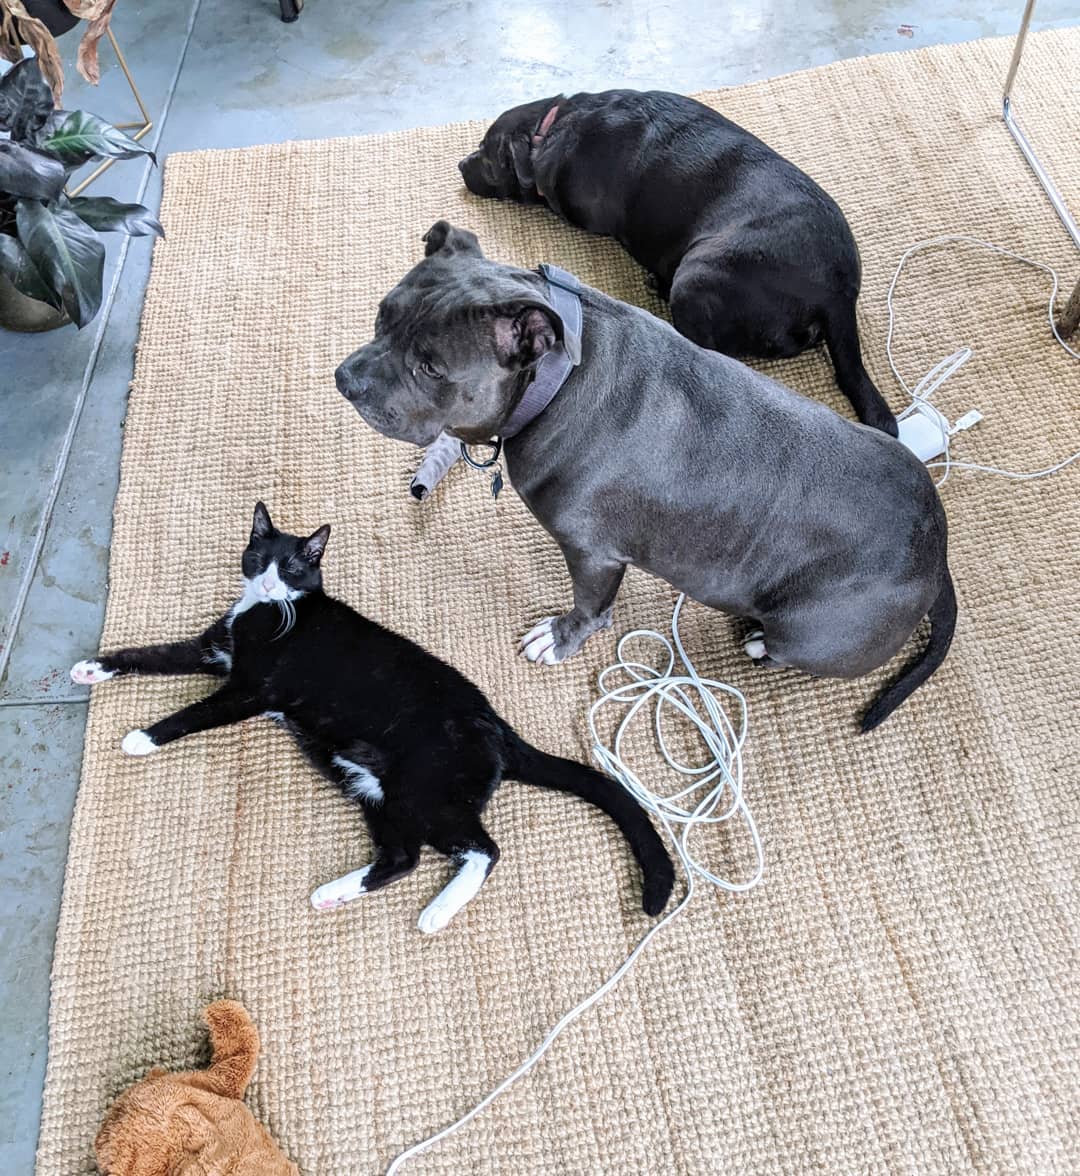 foster dog with cats and other dog at home